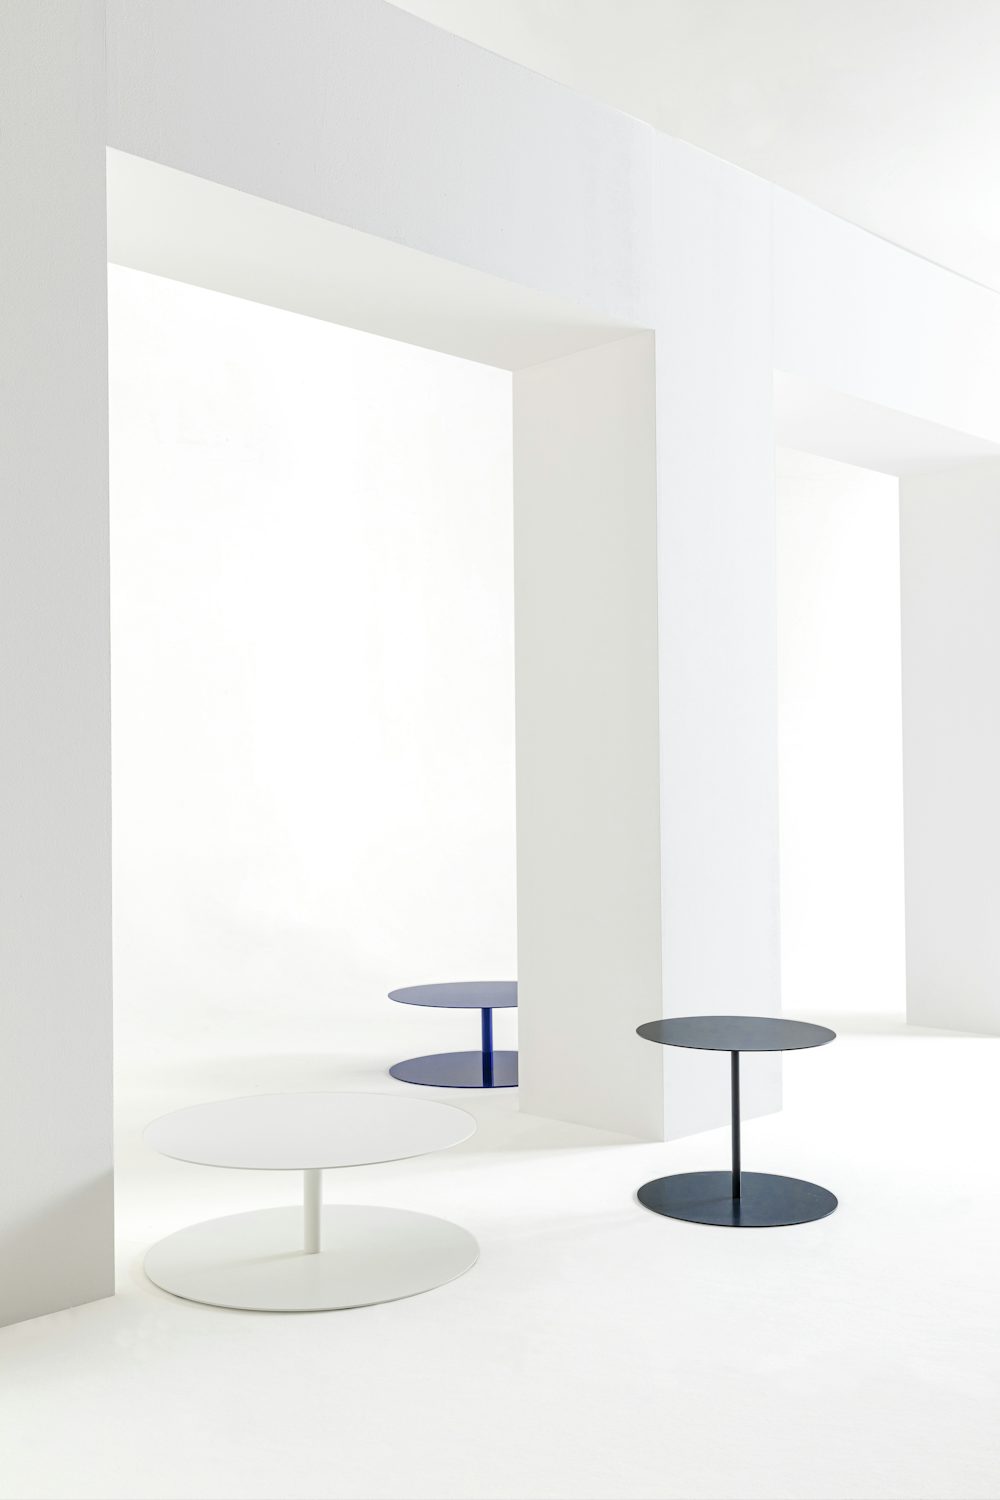 Gong table giulio cappellini 3